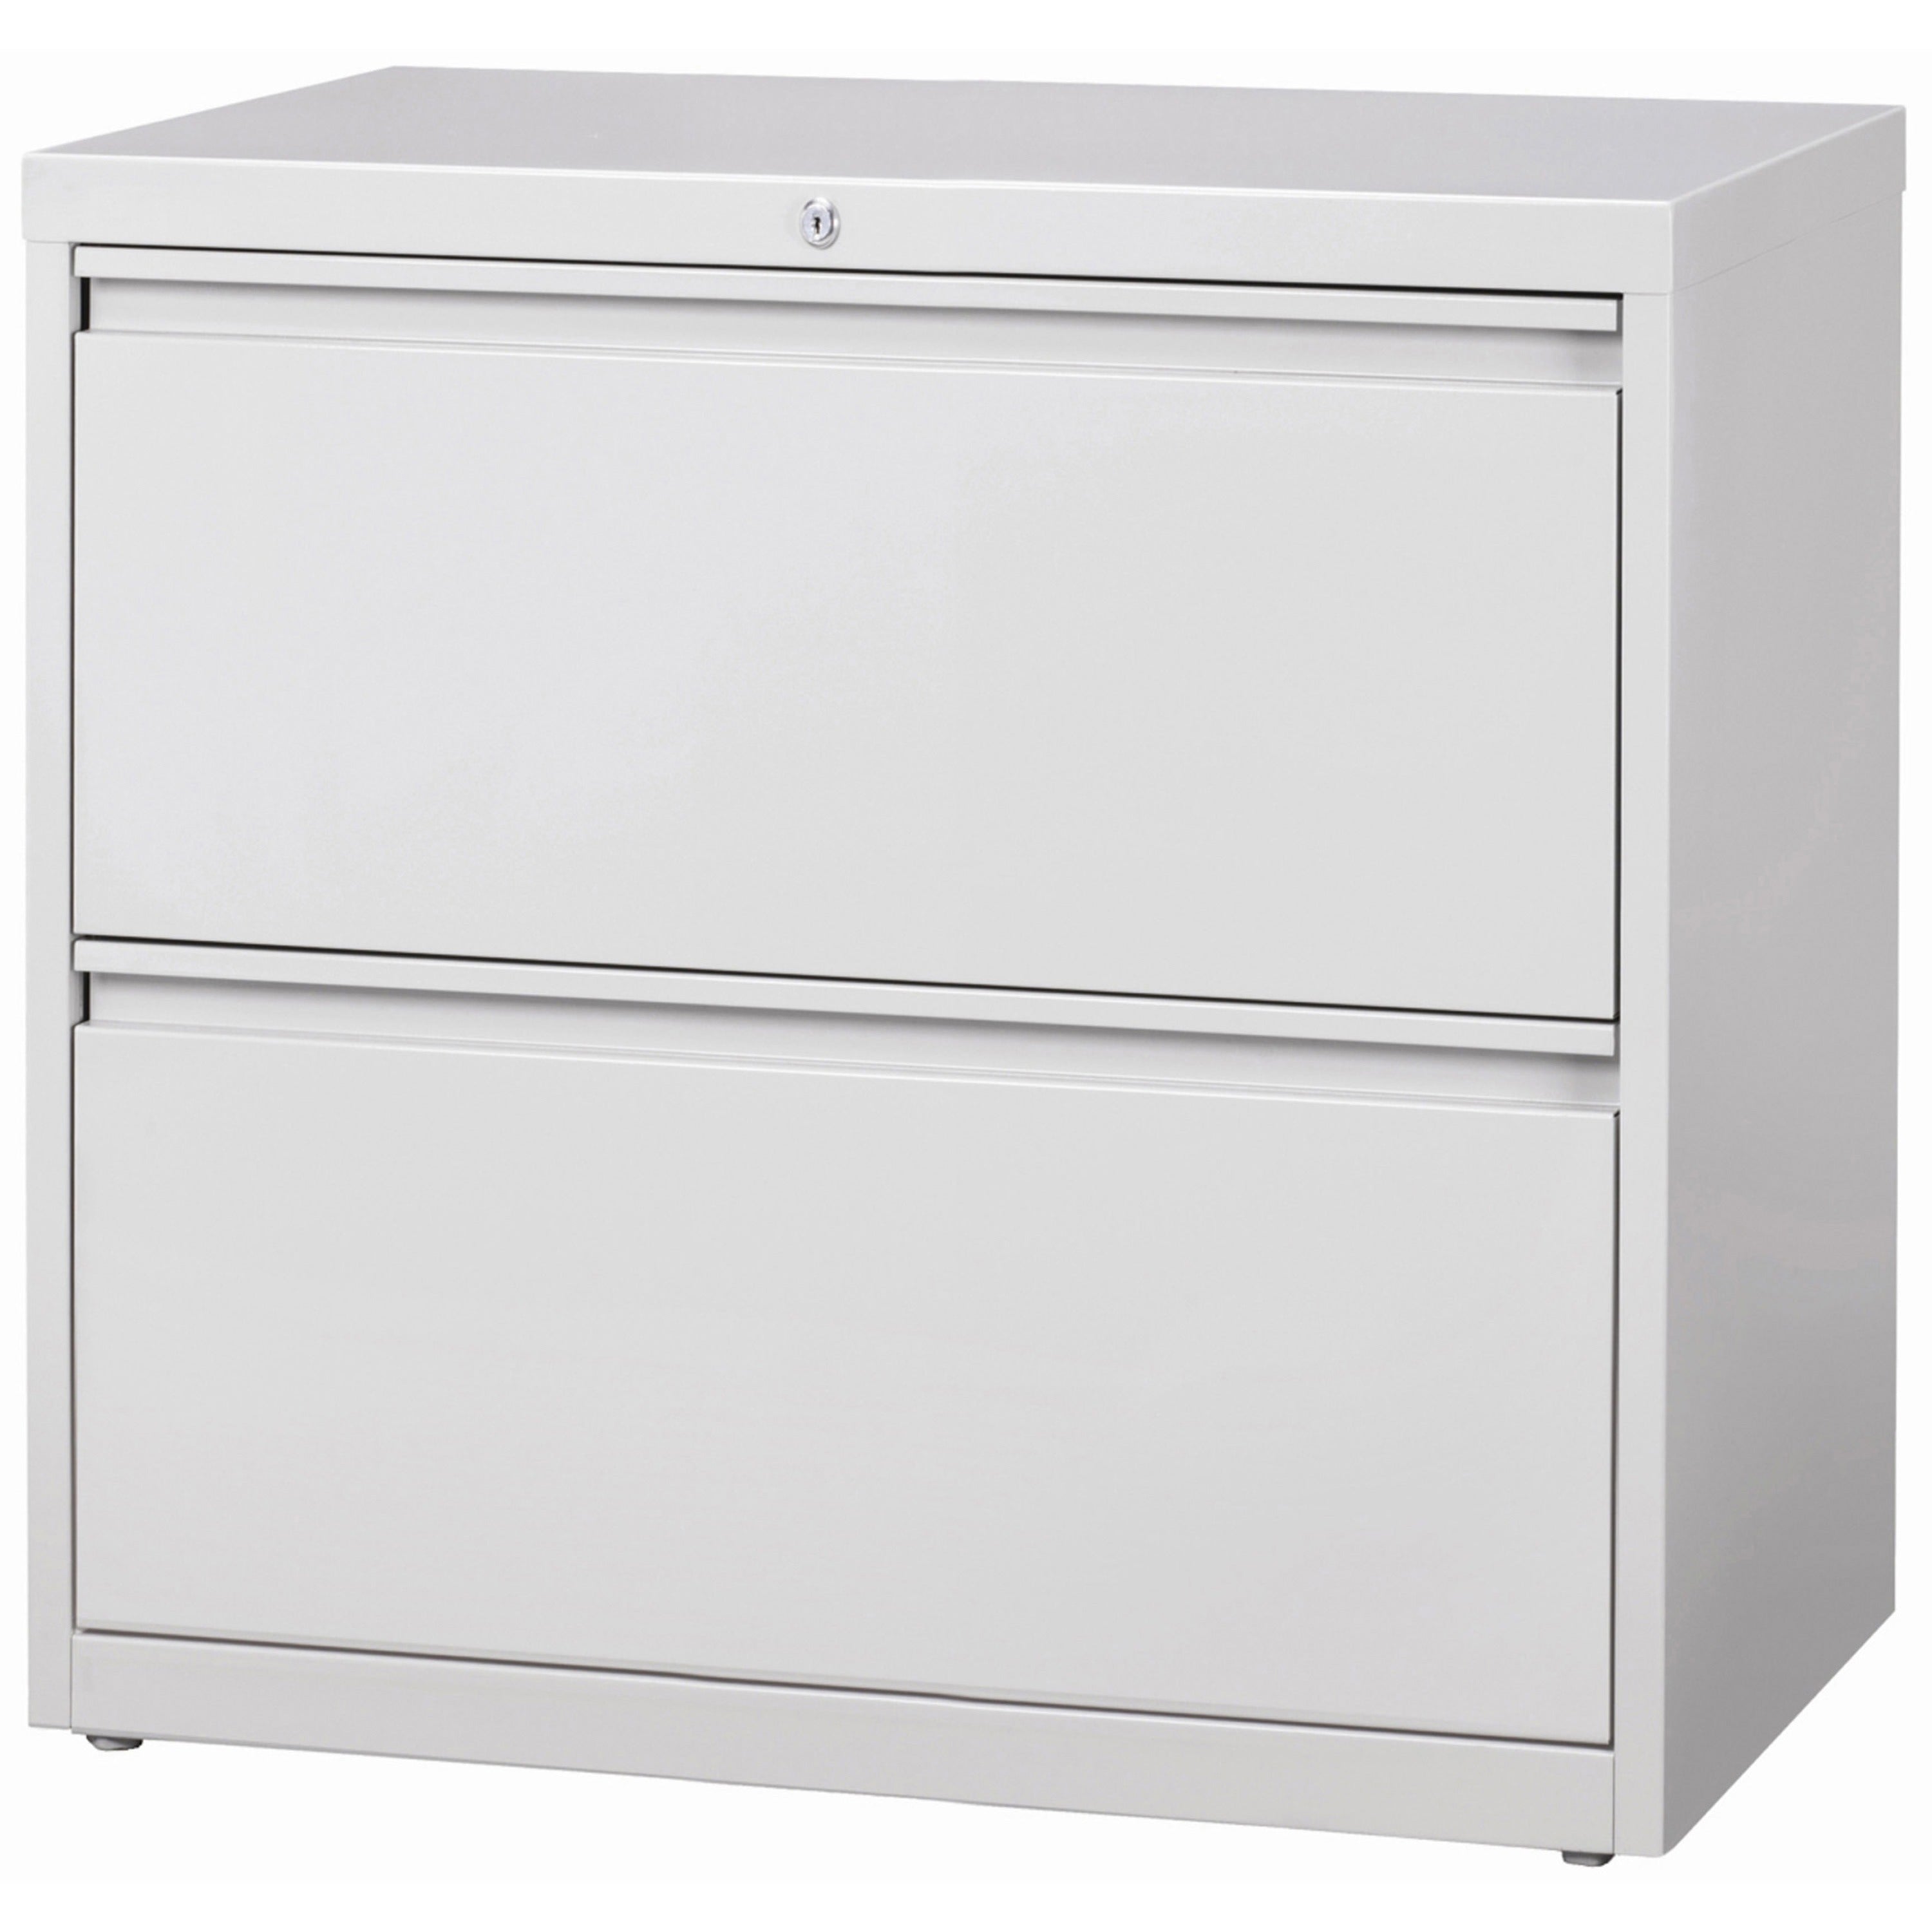 Lorell Fortress Series Lateral File - 36" x 18.6" x 28.1" - 2 x Drawer(s) for File - Legal, Letter, A4 - Lateral - Rust Proof, Leveling Glide, Interlocking, Ball-bearing Suspension, Label Holder, Hanging Rail - Light Gray - Baked Enamel - Steel - Rec - 